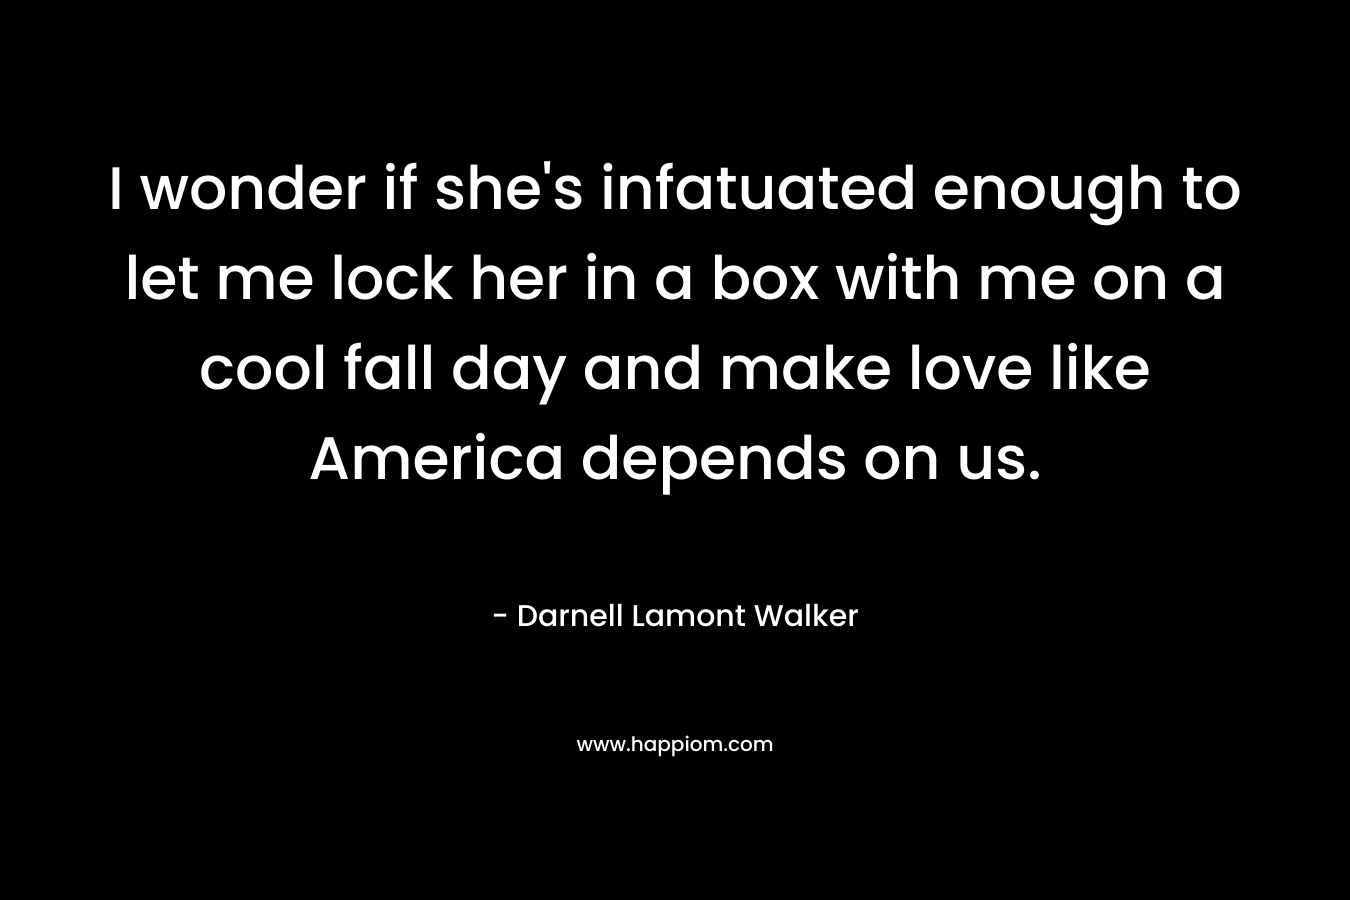 I wonder if she’s infatuated enough to let me lock her in a box with me on a cool fall day and make love like America depends on us. – Darnell Lamont Walker